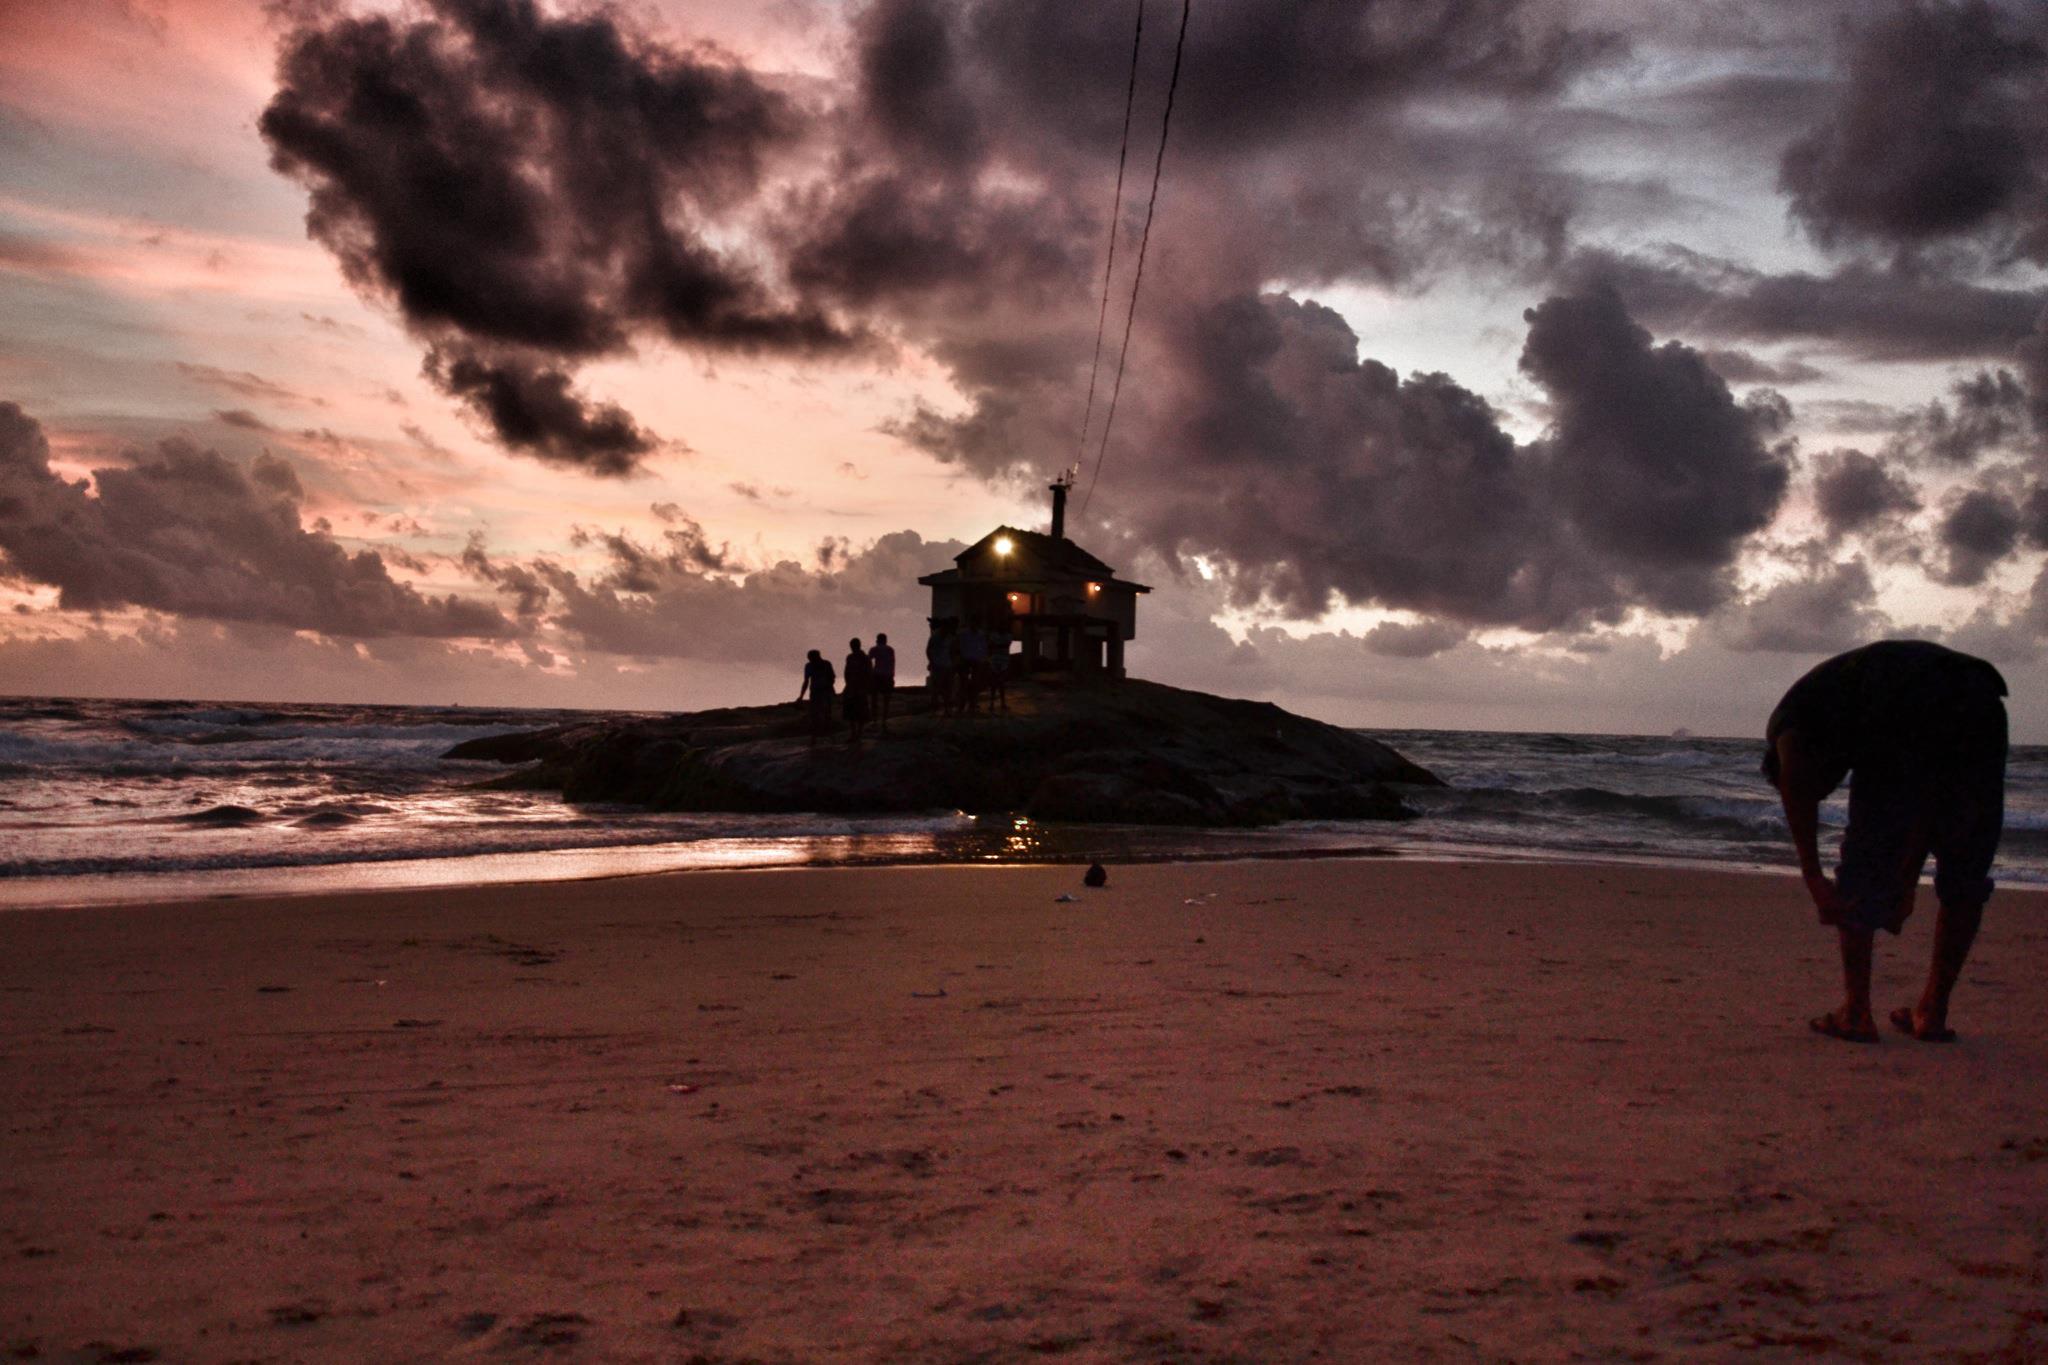 Evening Sunset by Mount Lavinia-Colombo